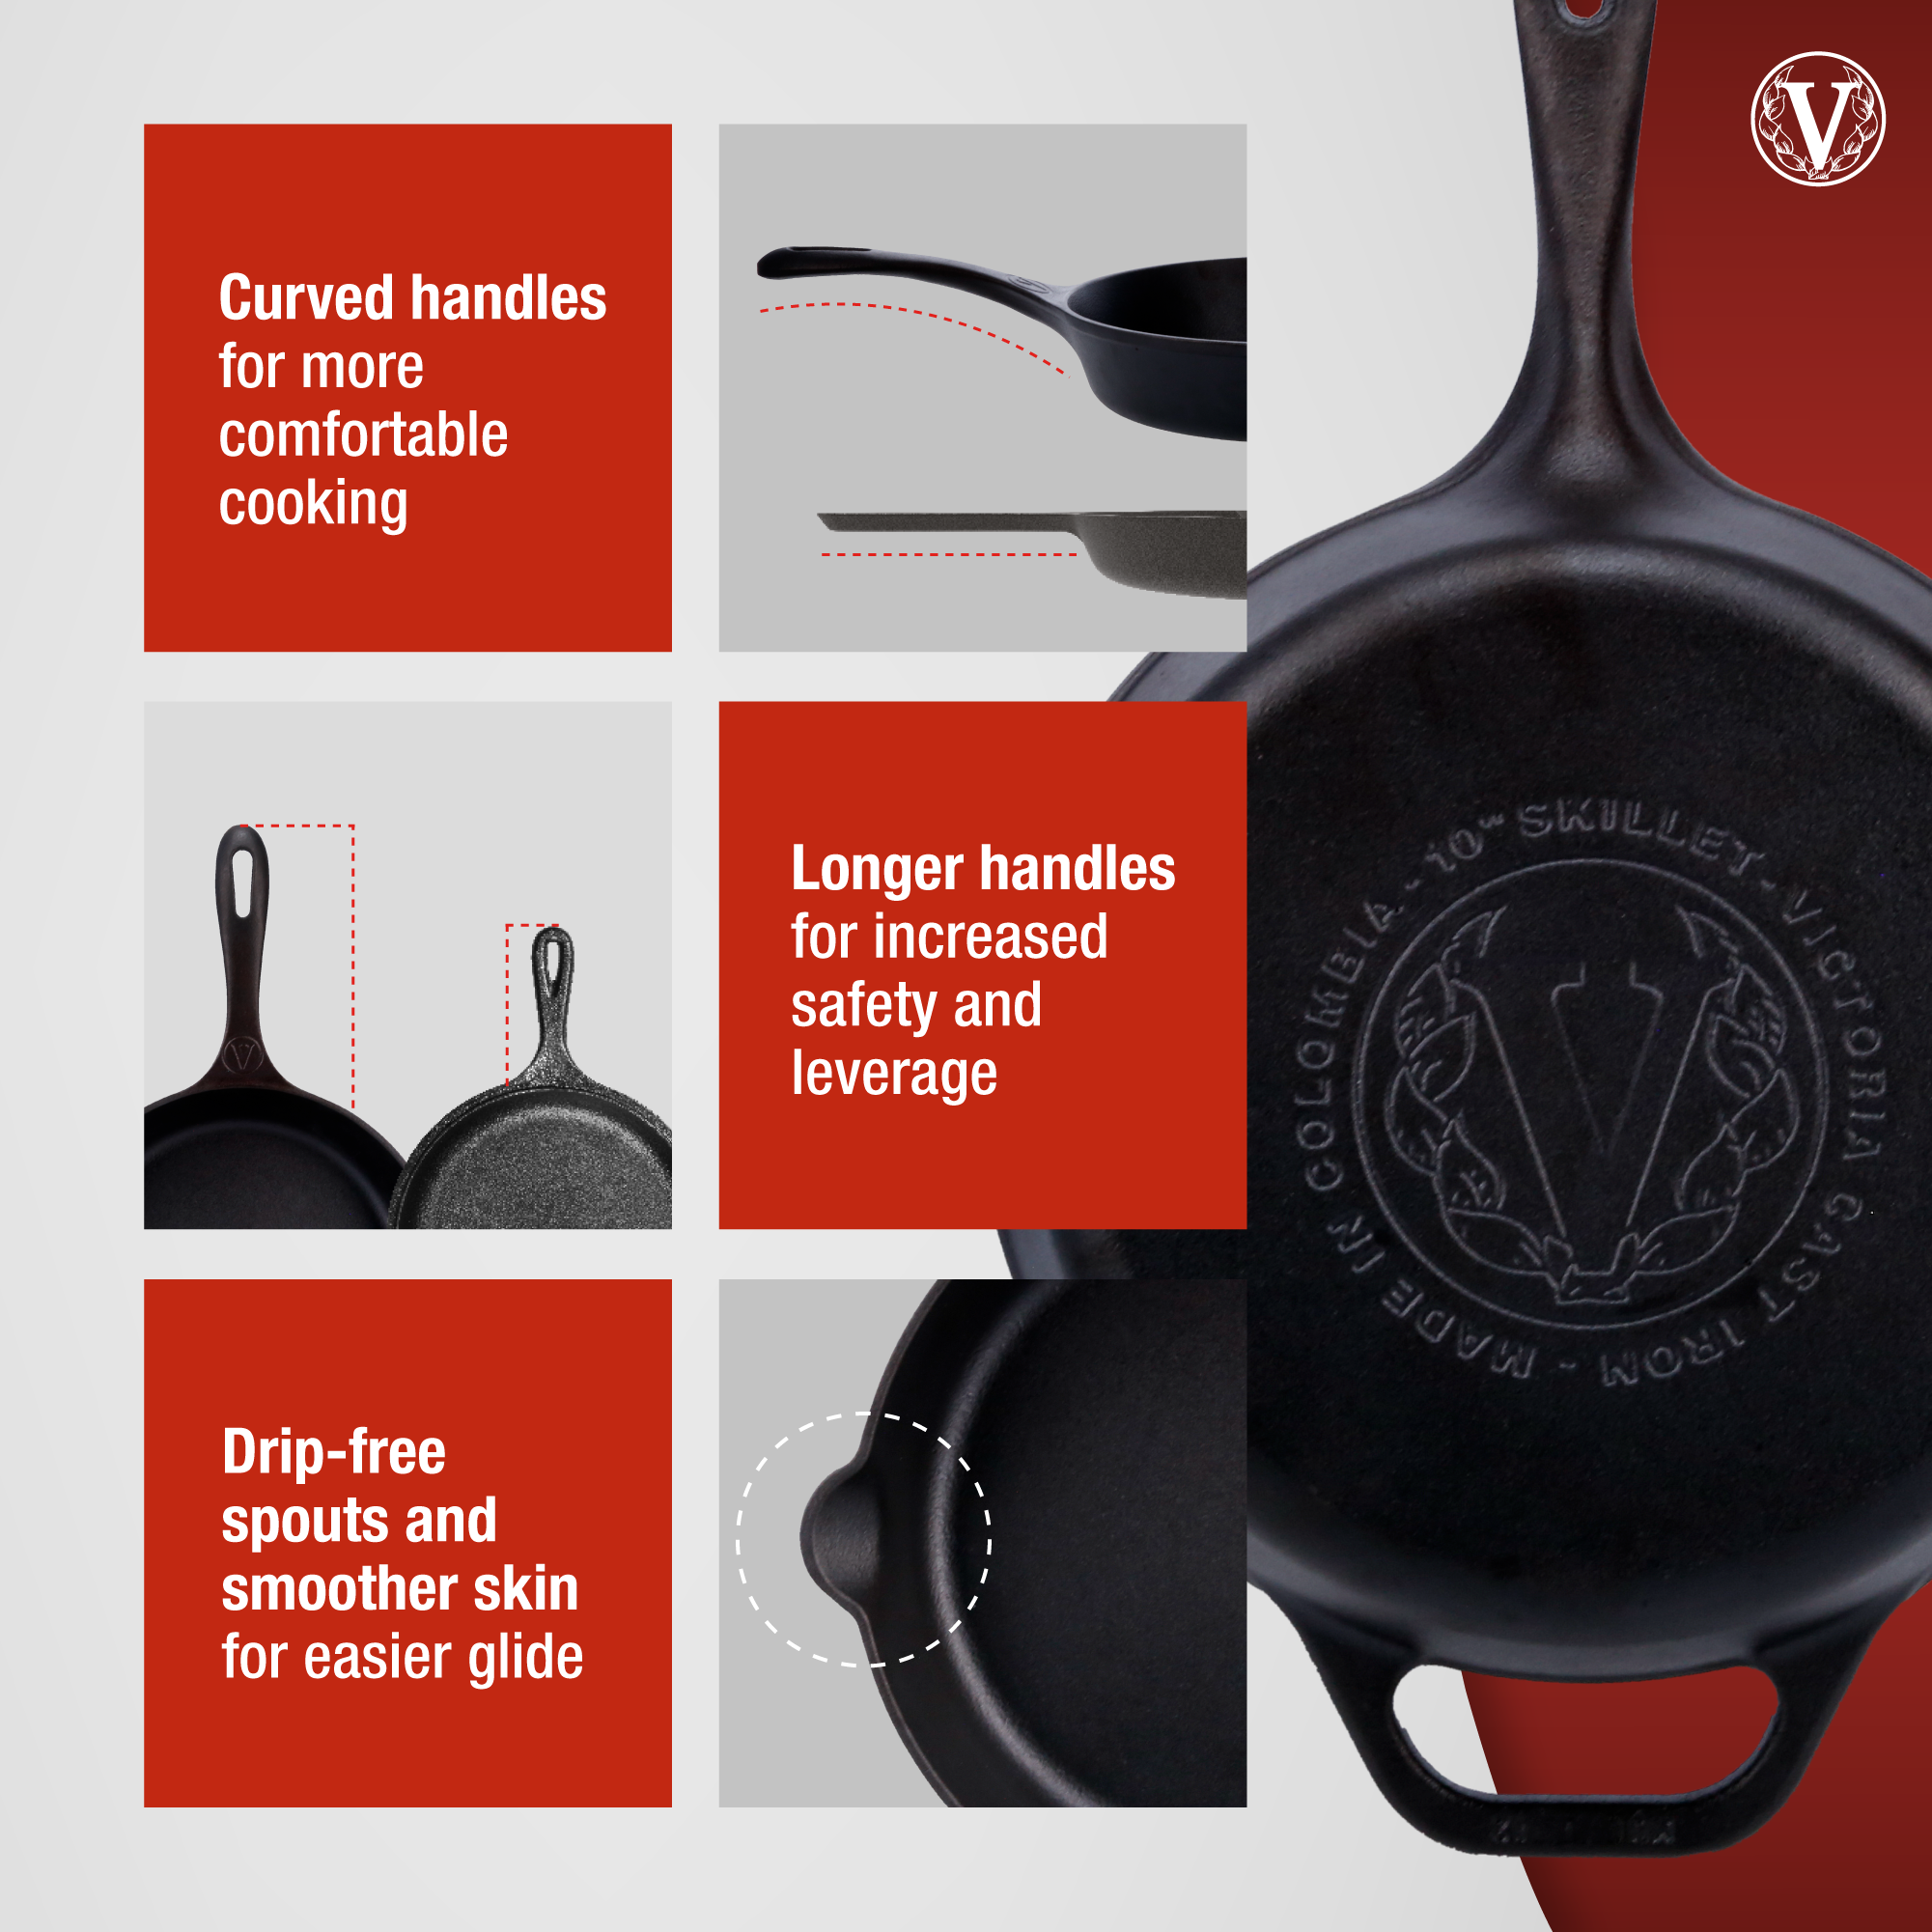 Victoria Cast Iron Skillet, Pre-Seasoned Cast-Iron Frying Pan with Long Handle, Made in Colombia, 12 Inch - image 3 of 5